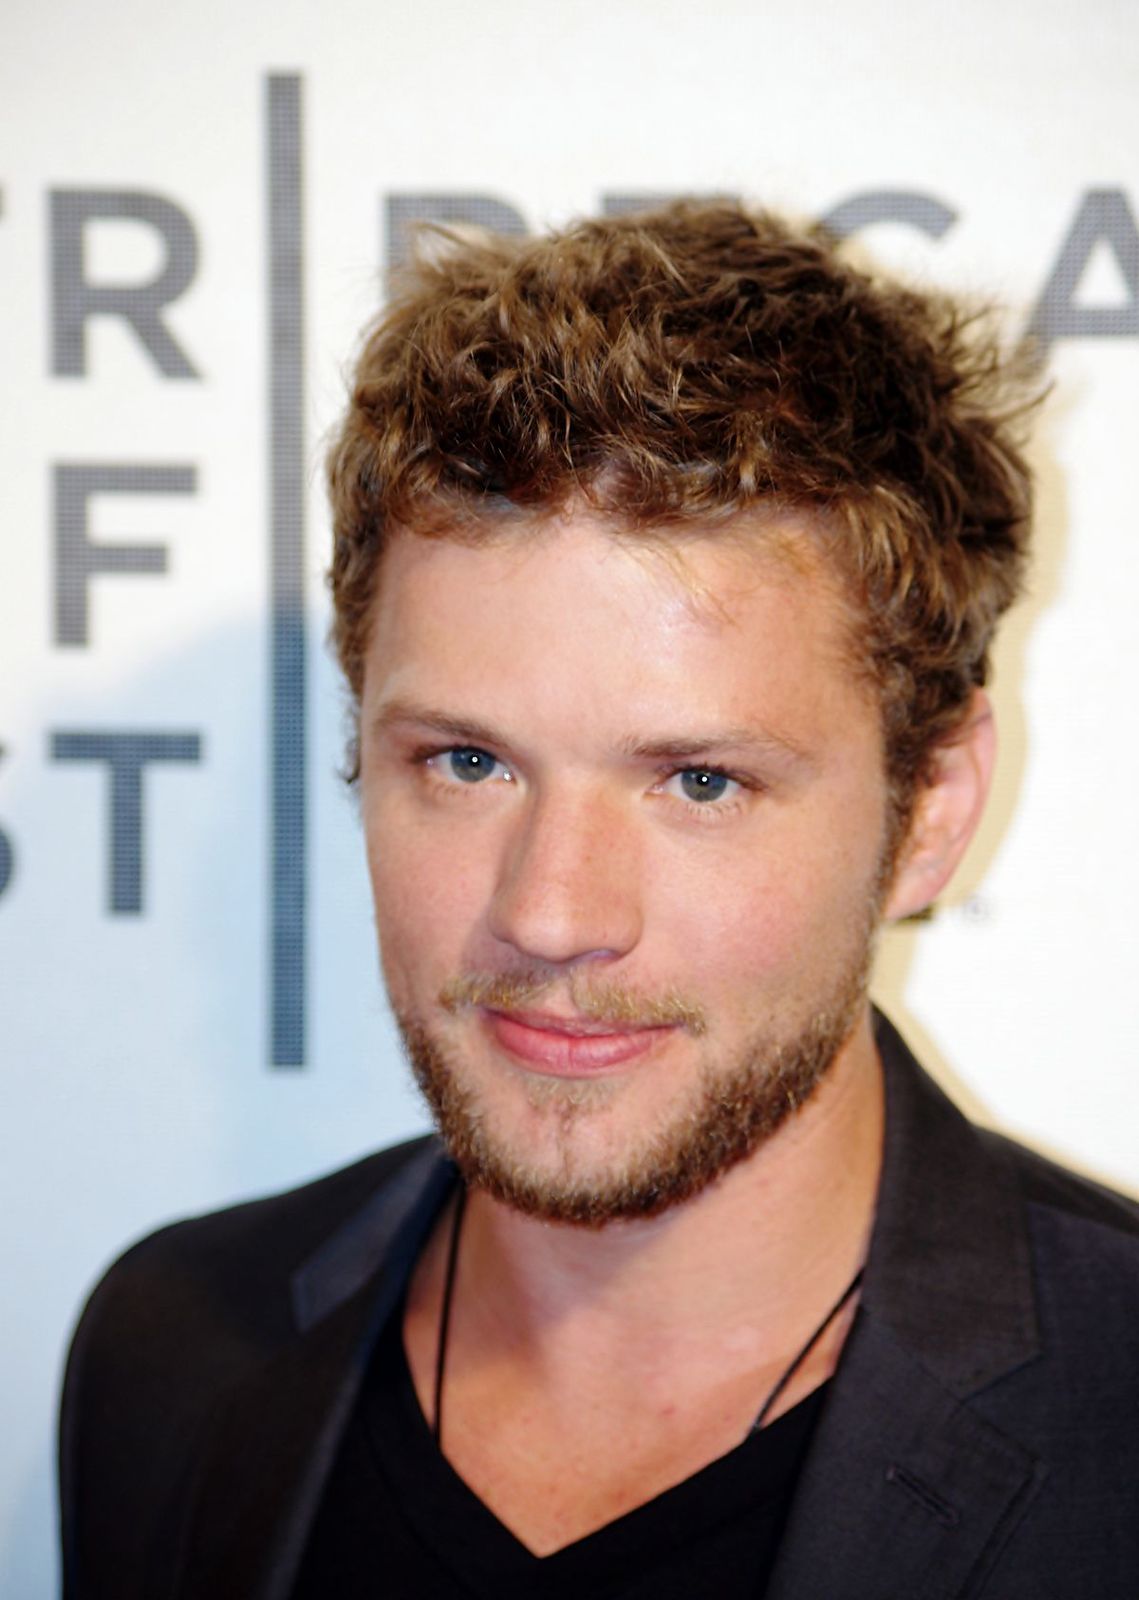 Ryan Phillippe To File A Counter-Suit Against Ex-Girlfriend For Her Claims Of Domestic Violence 